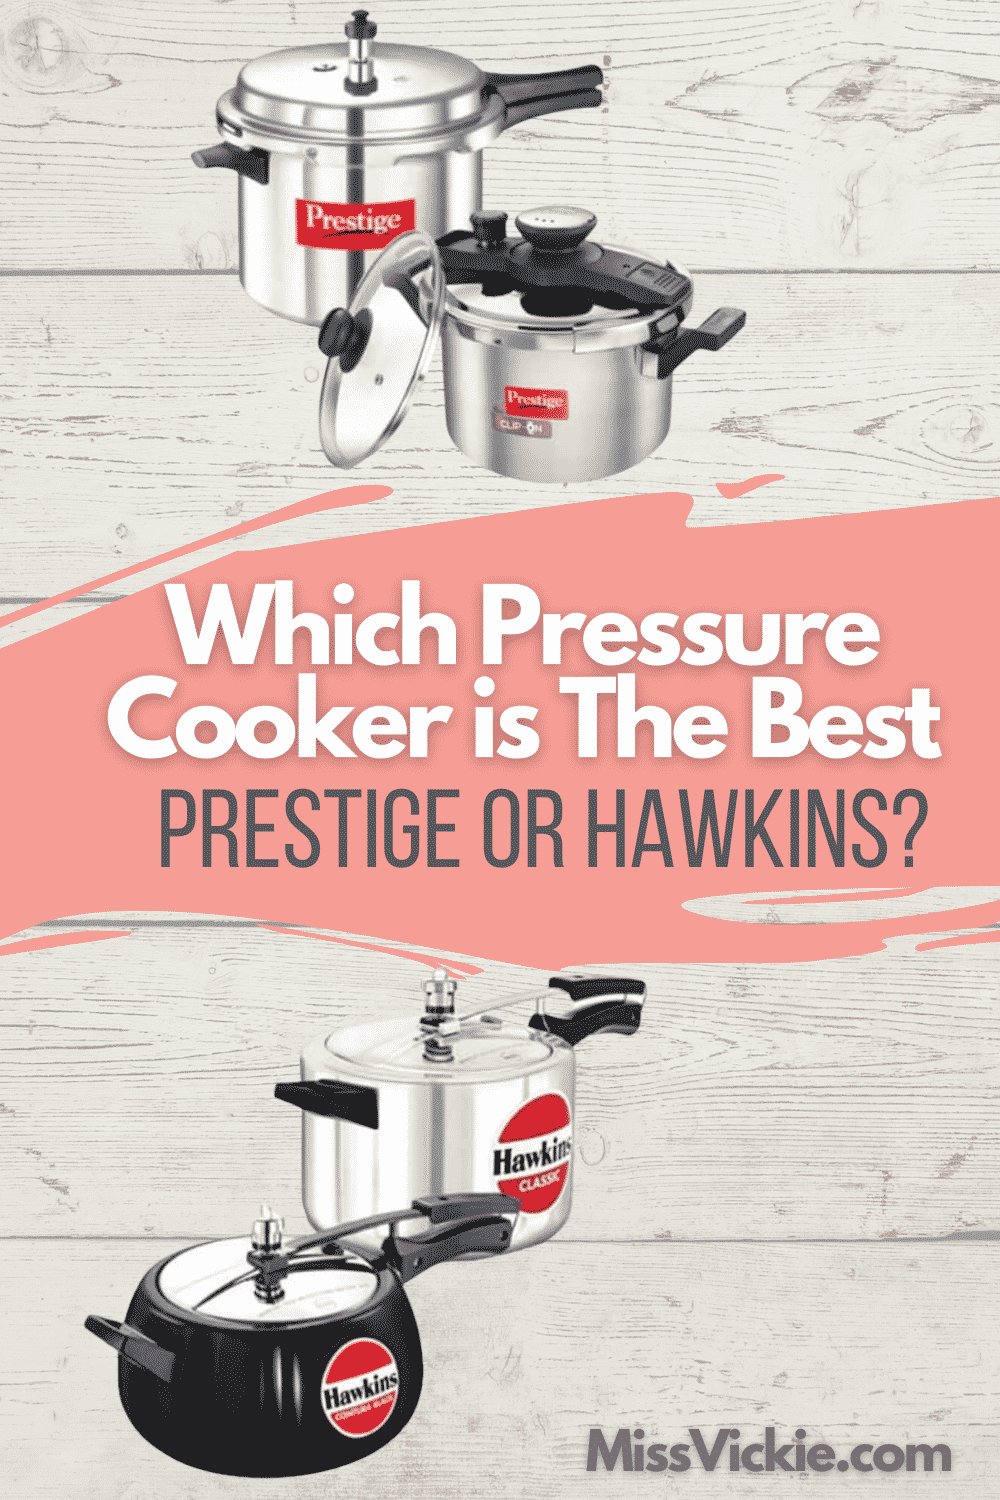 Which Pressure Cooker Is The Best Prestige or Hawkins